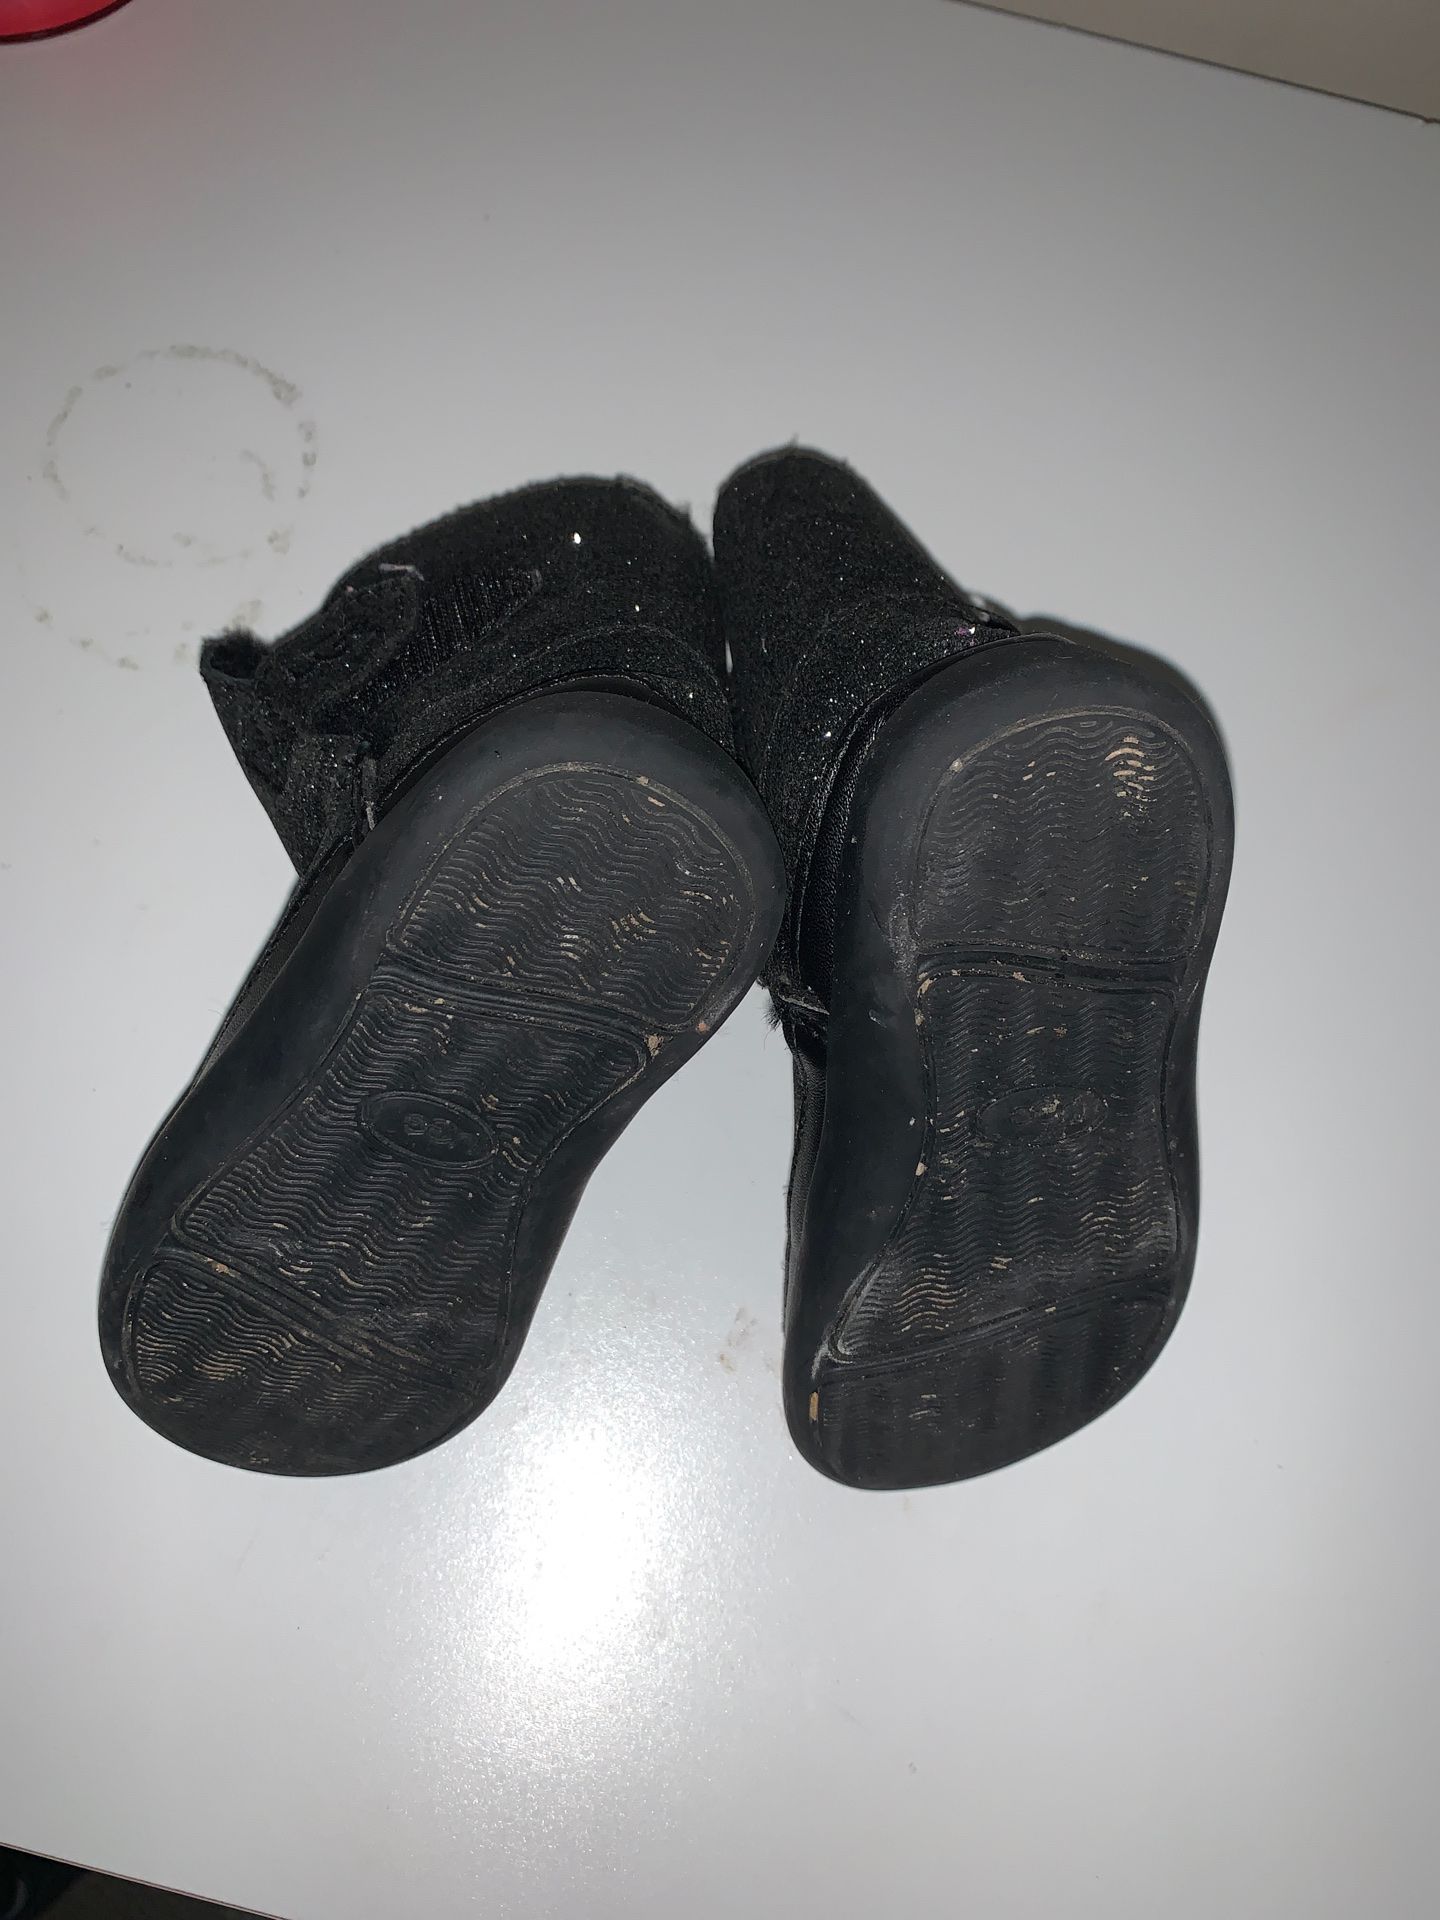 Ugg boots toddler size 5